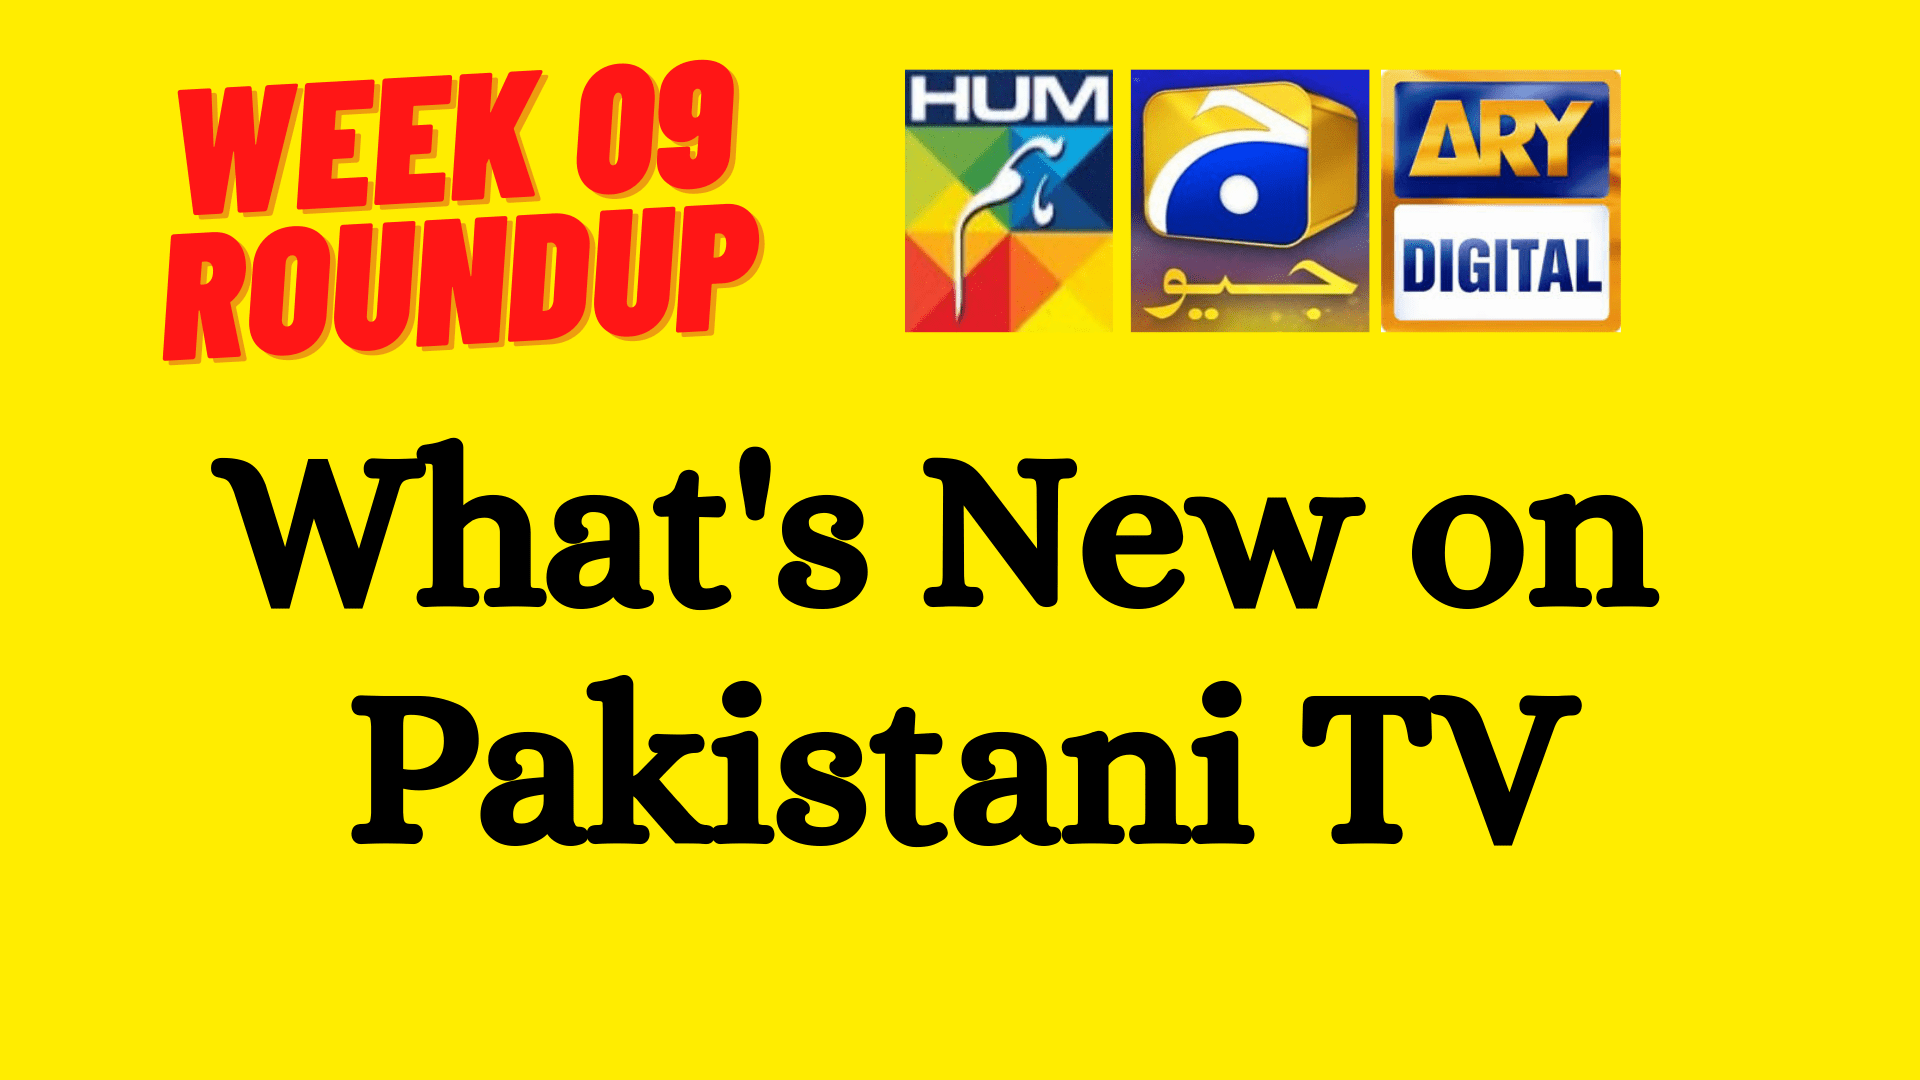 What's New on Pakistani TV Week-09